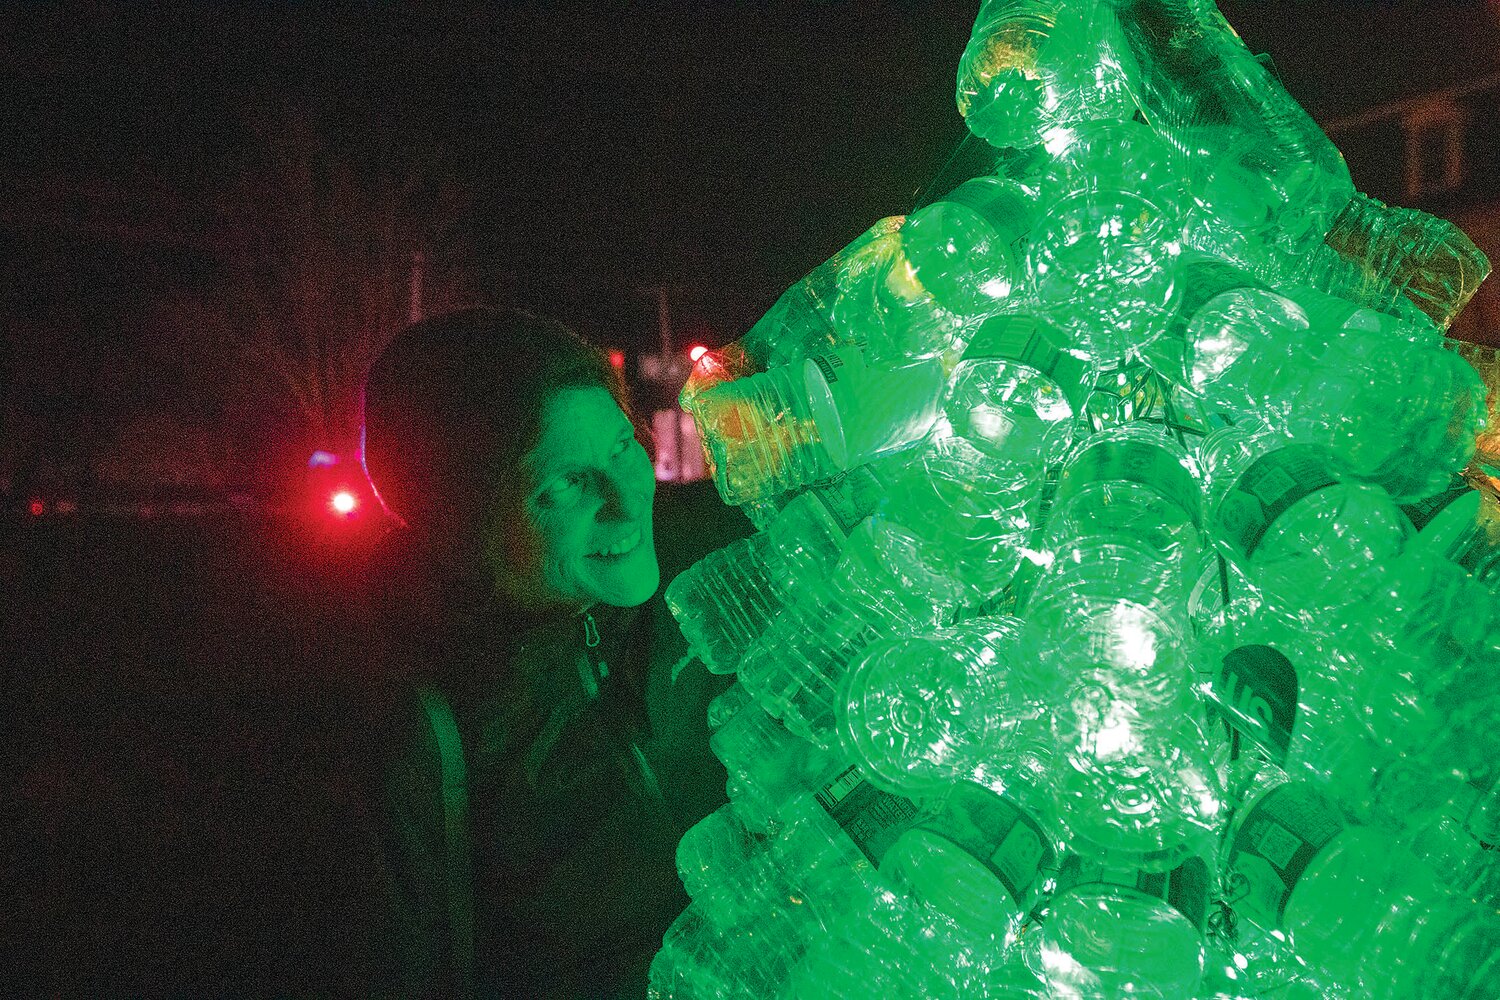 Jenny Wieting puts the finishing touches on a tree made of platic water bottles. She is trying to get exposure to help the state pass a bottle bill.